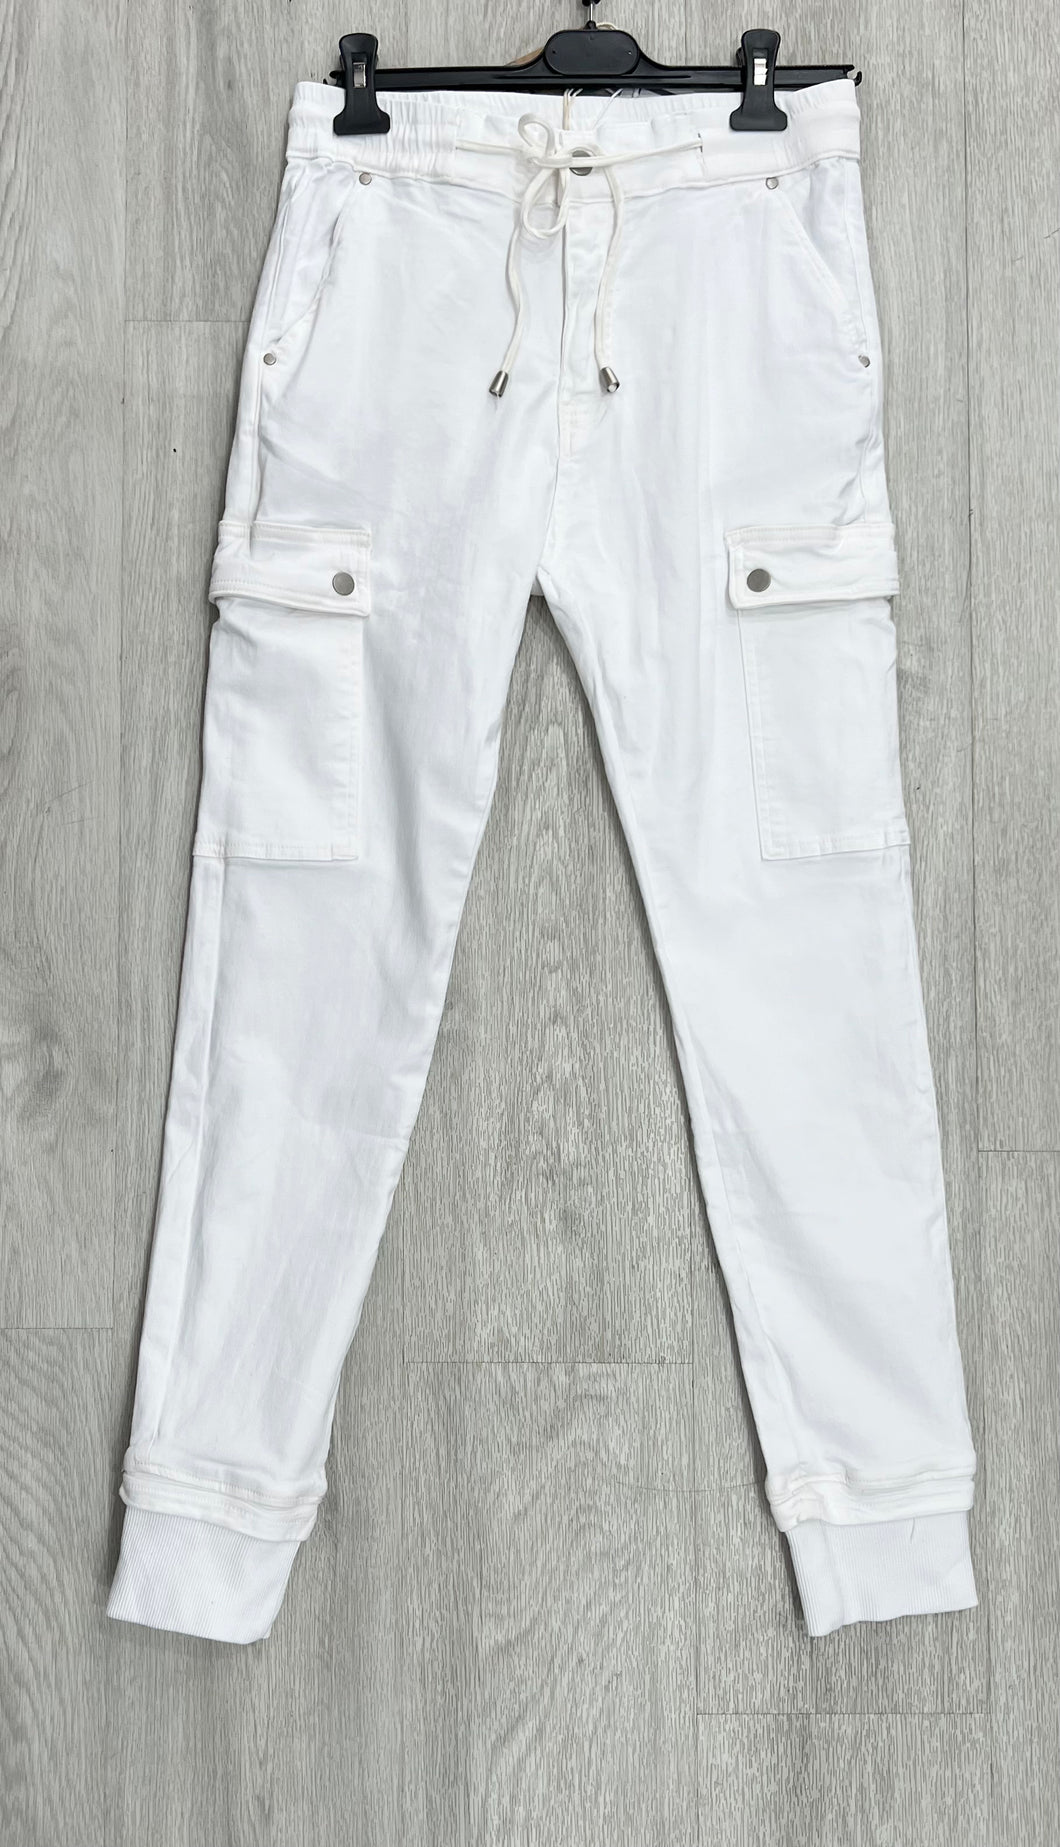 Melly & co Jean jogger jeans - white